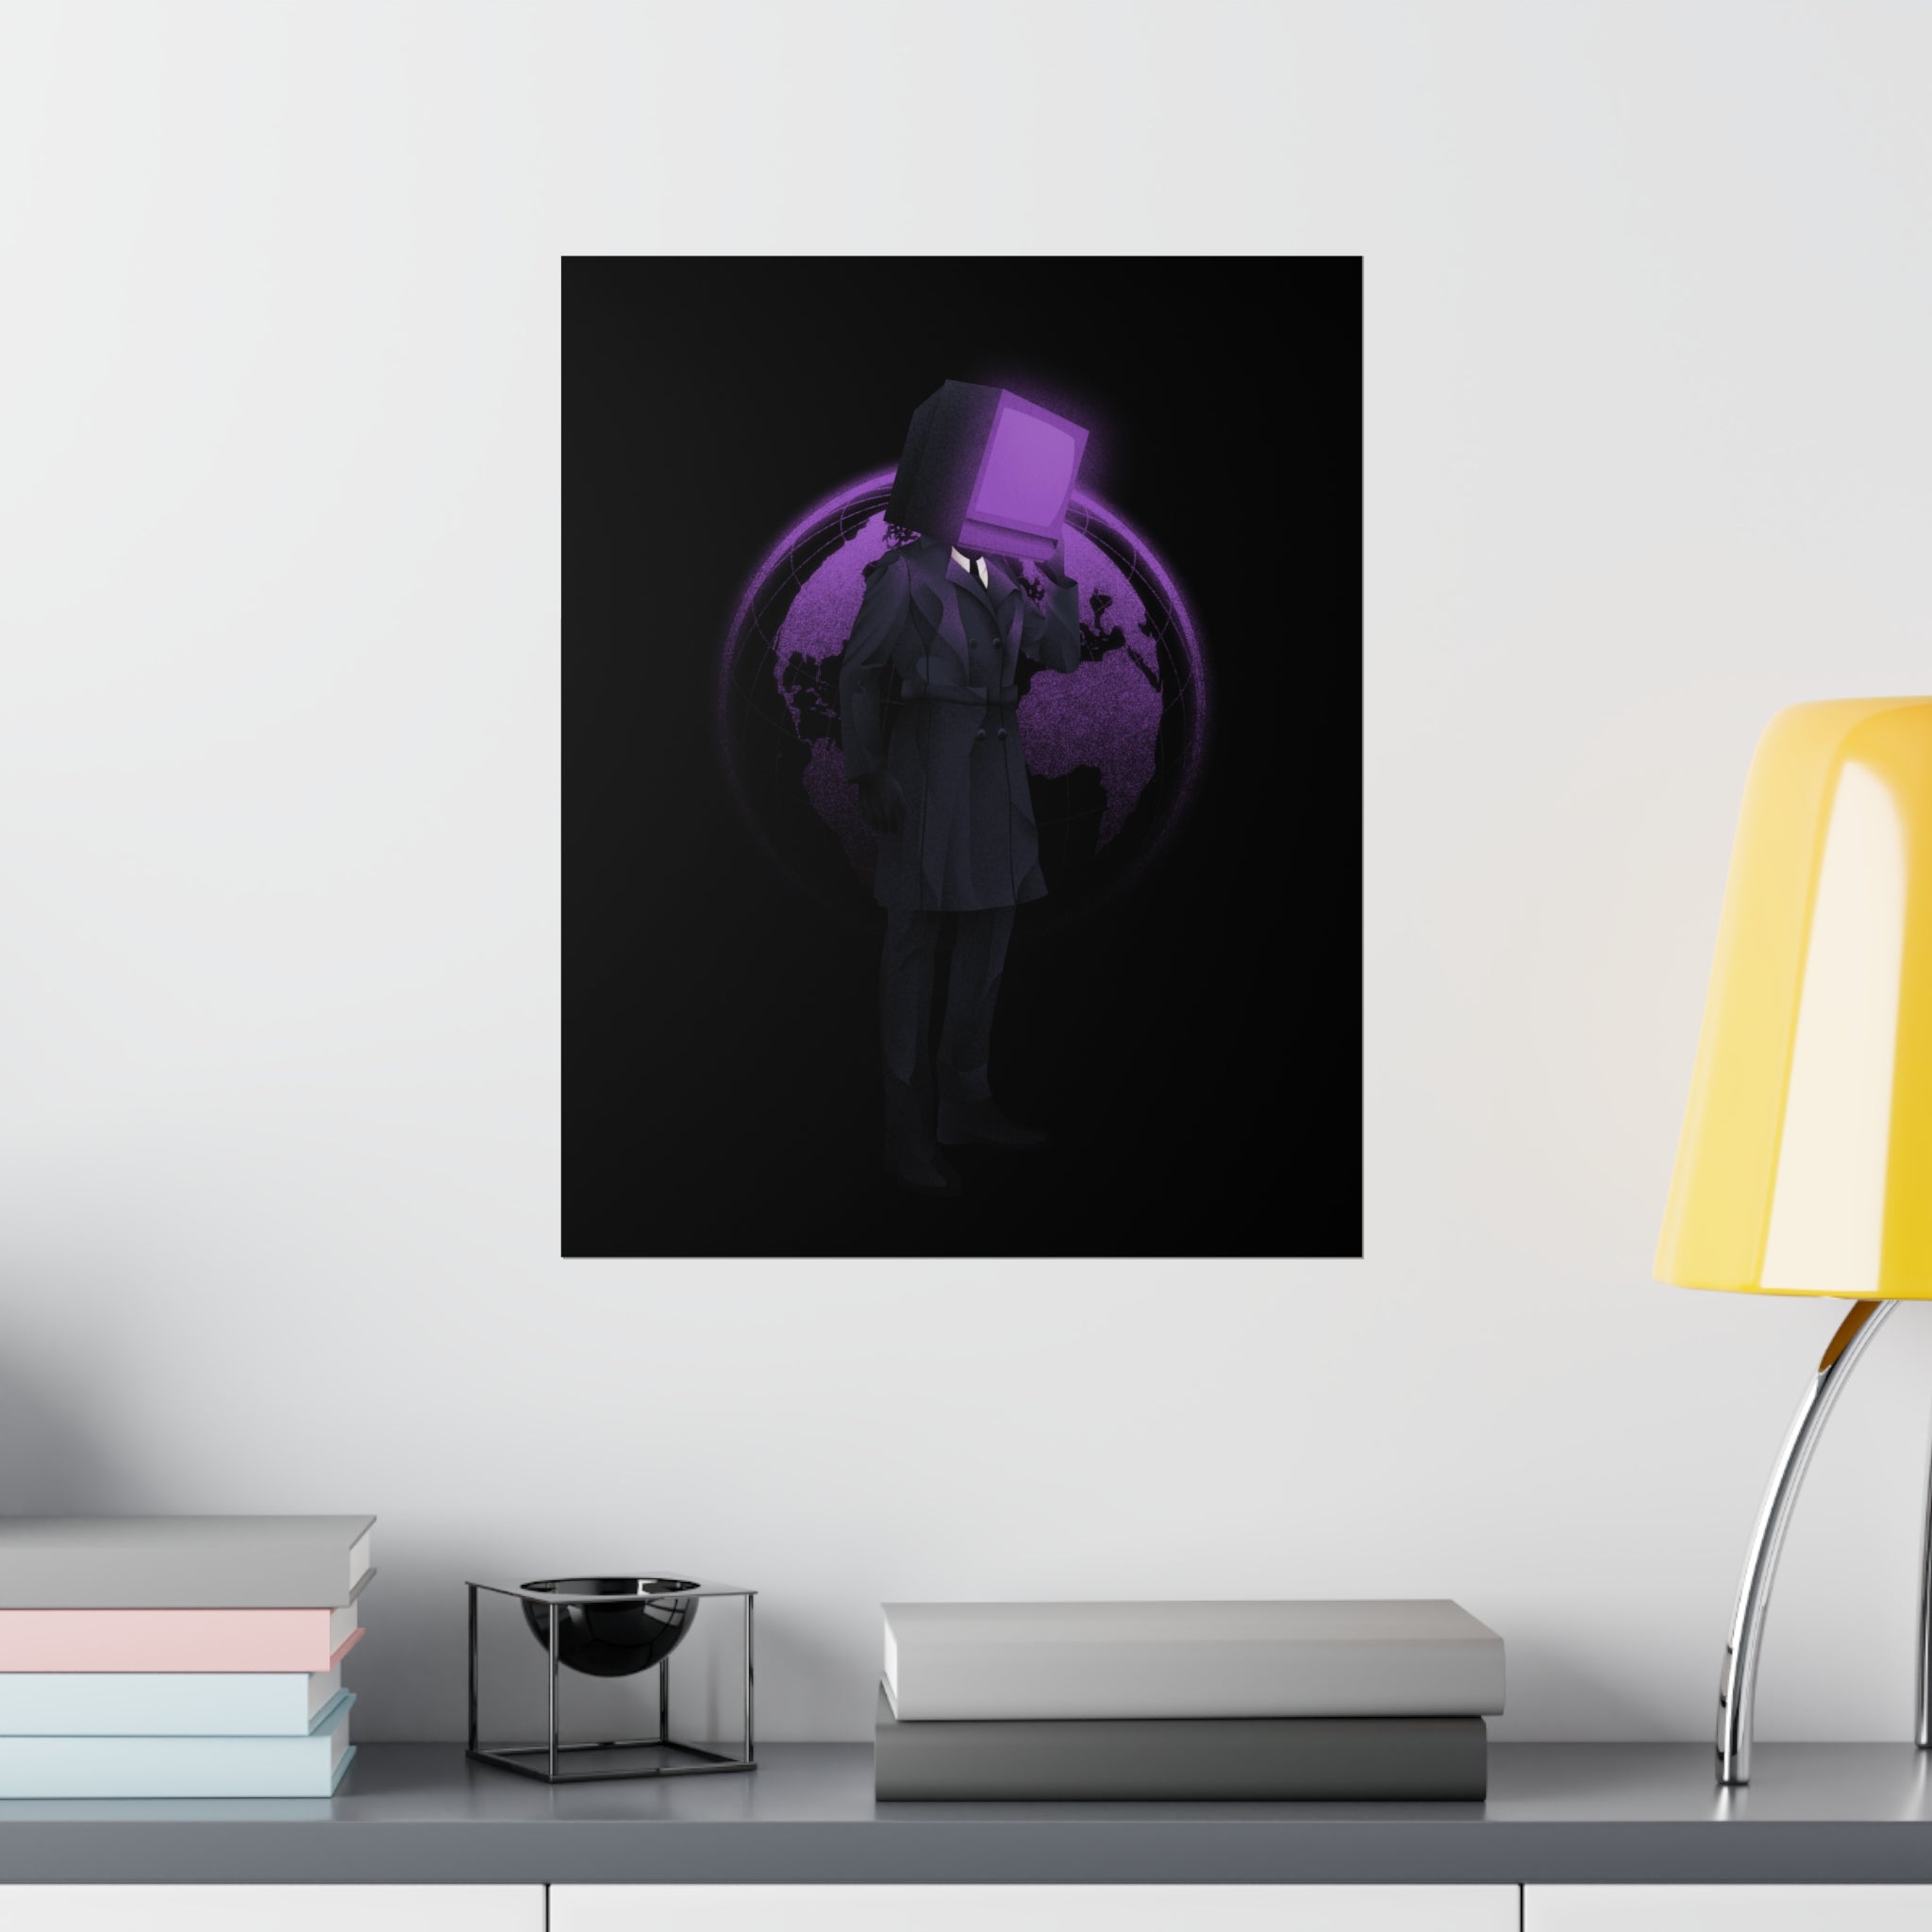 Matte poster of TV Man with a purple-tinted world over credenza with yellow lamp and books